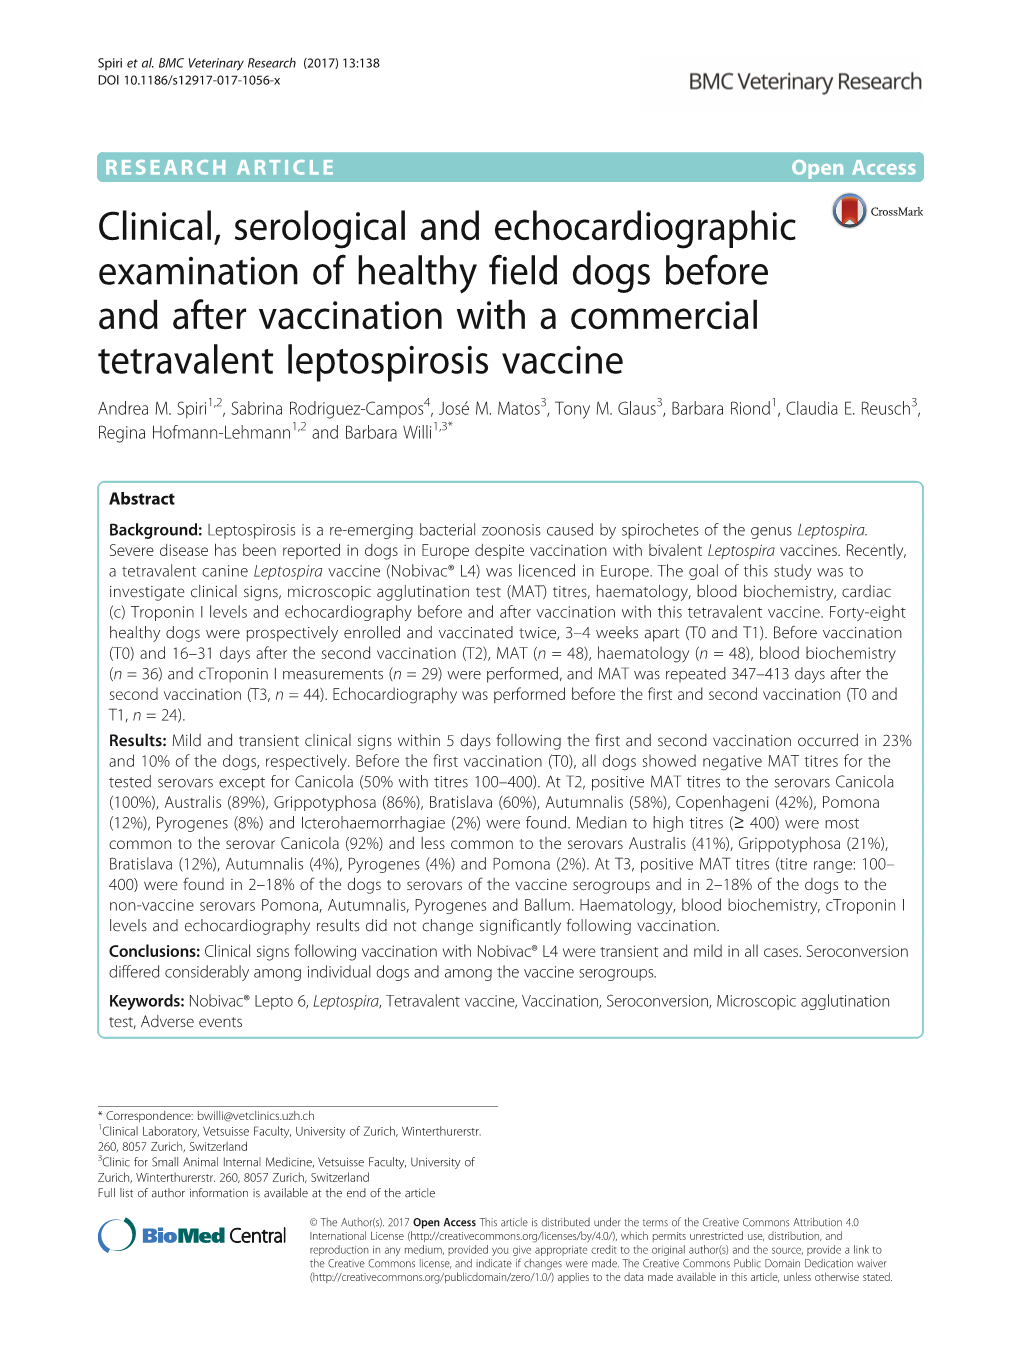 Clinical, Serological and Echocardiographic Examination of Healthy Field Dogs Before and After Vaccination with a Commercial